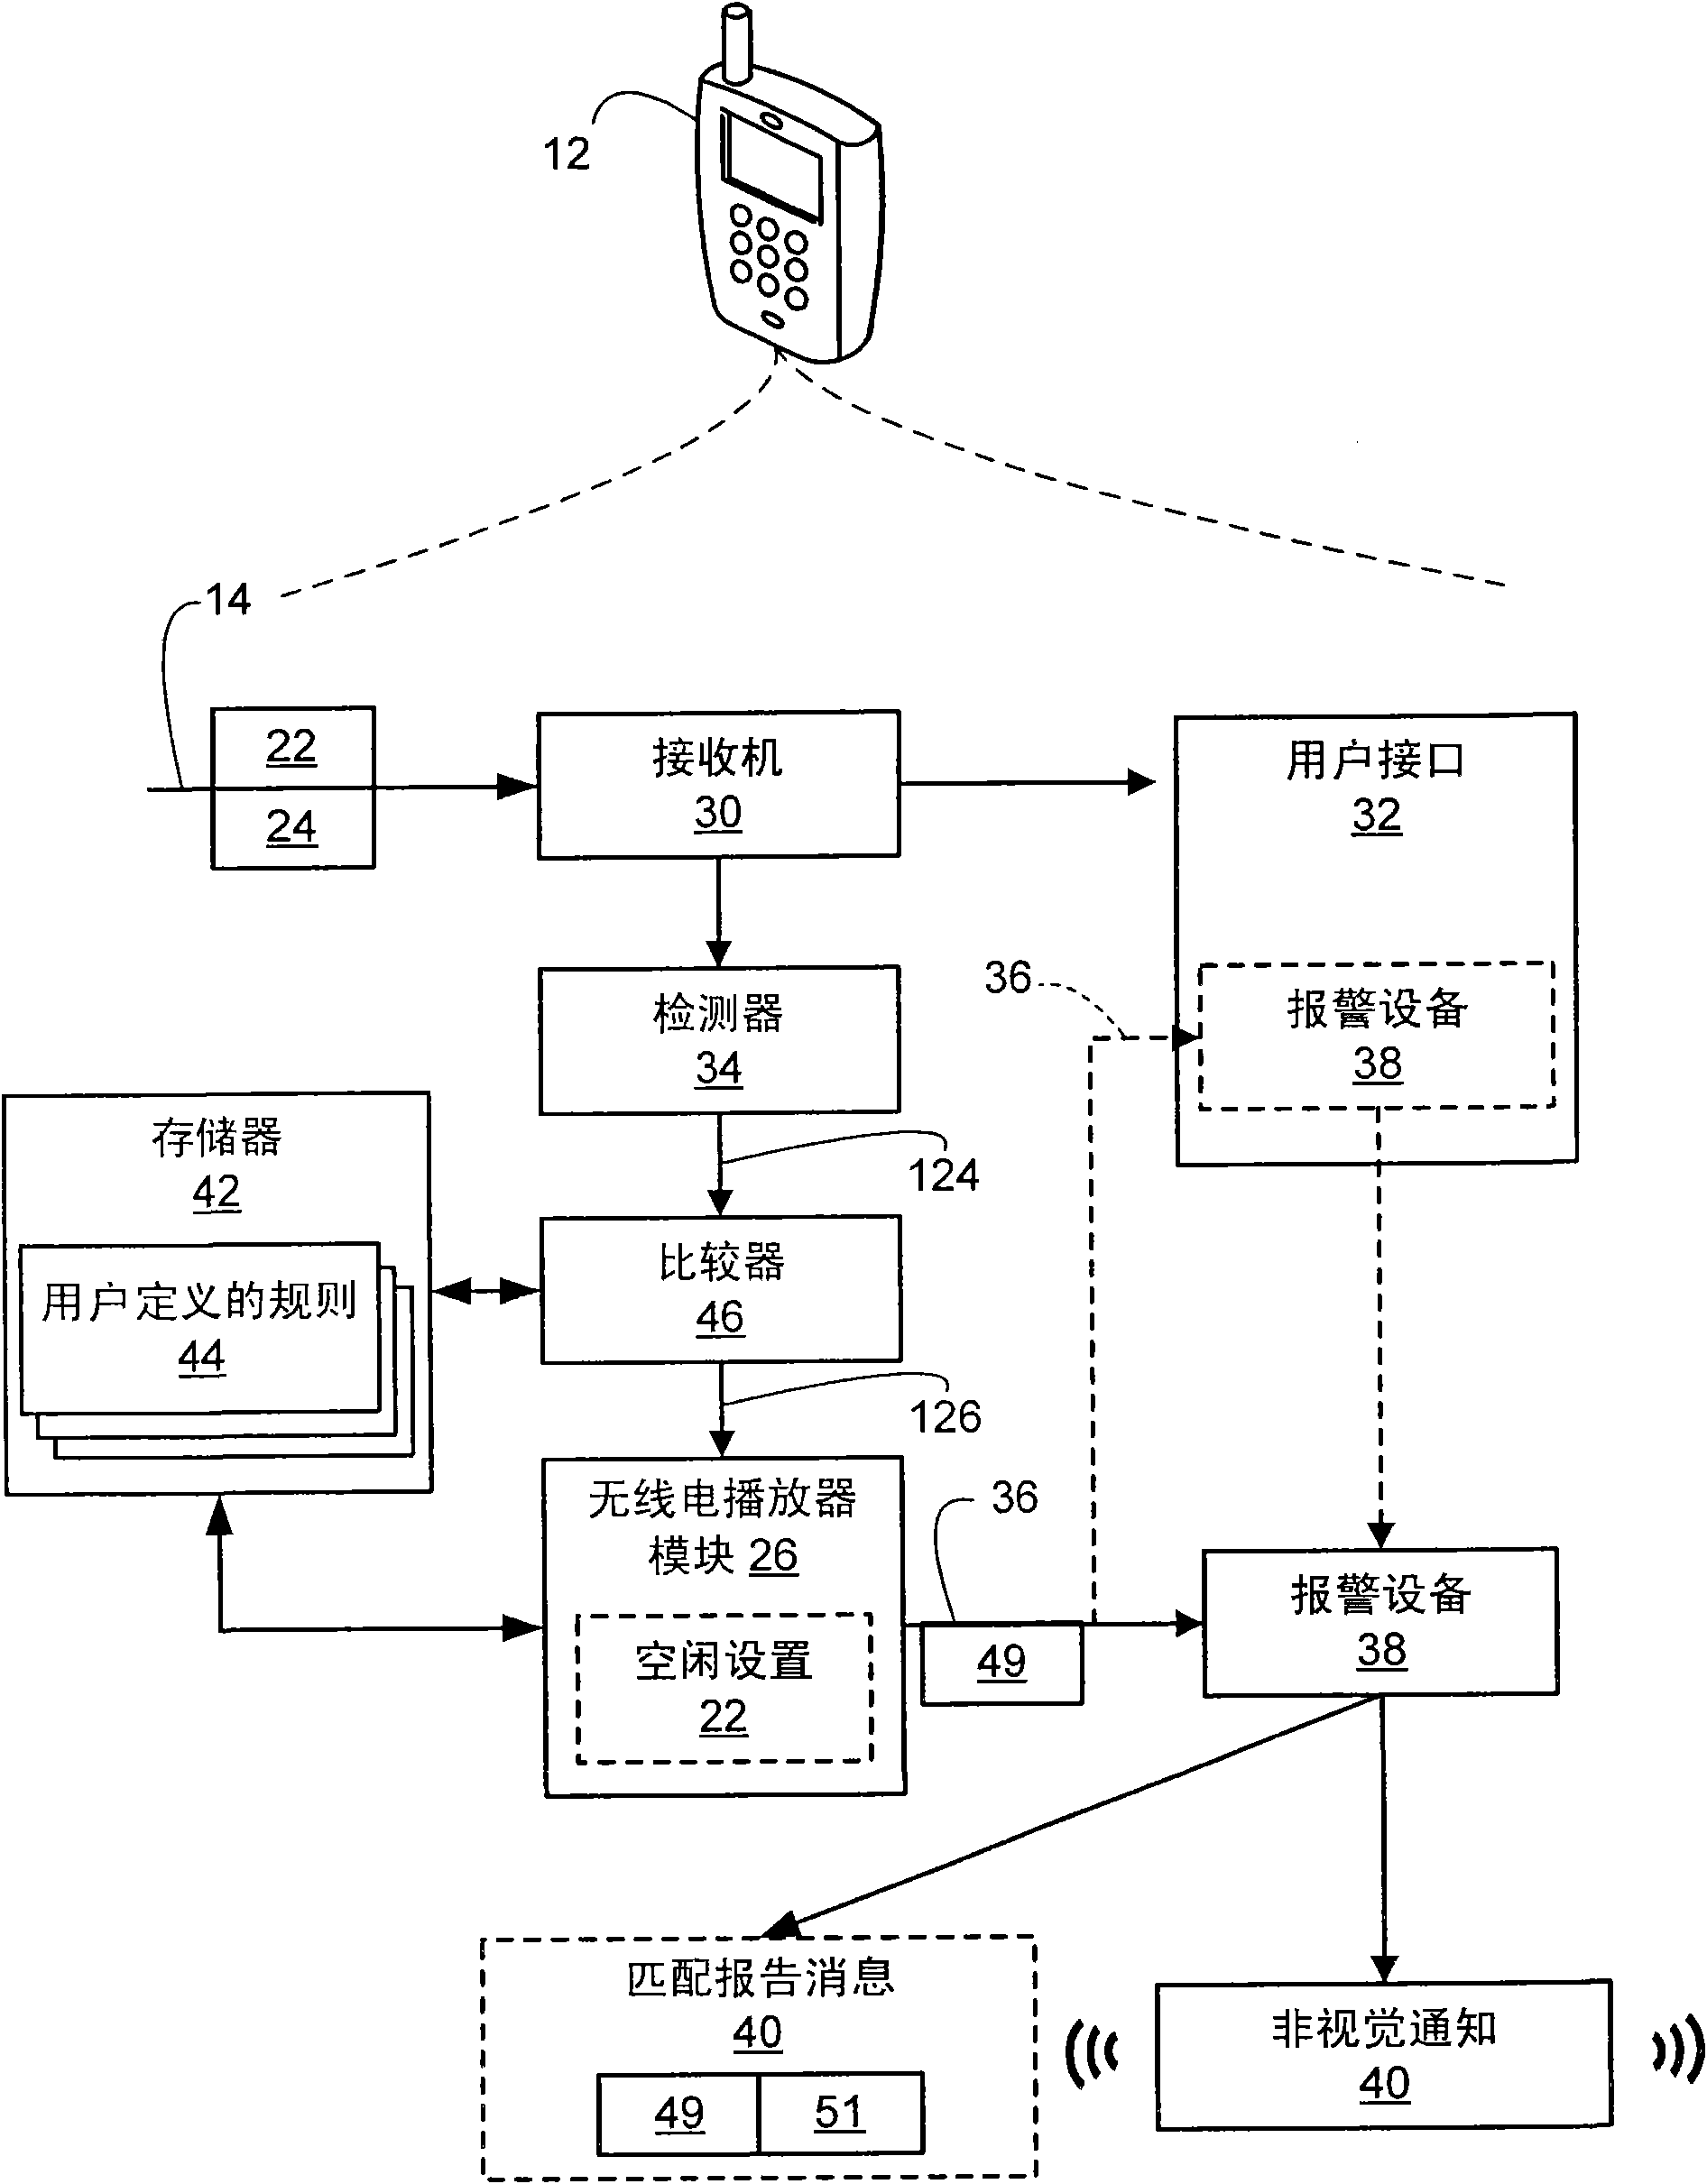 Device and methods of providing radio data system information alerts